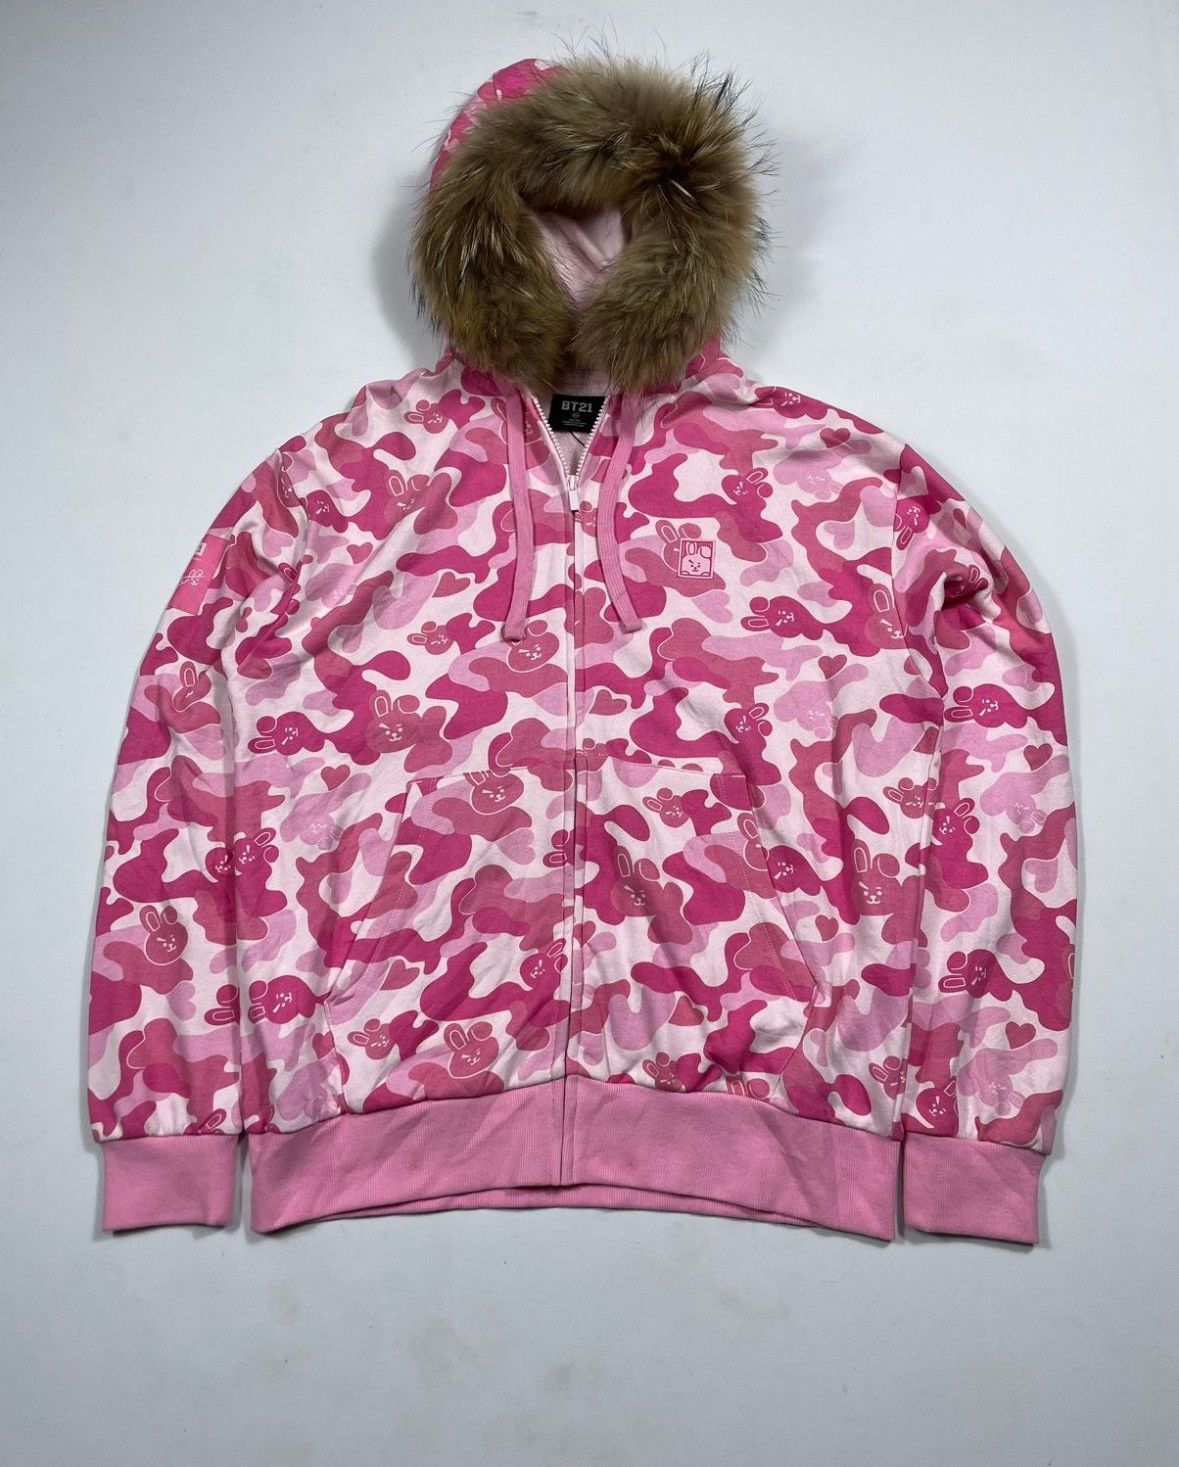 Hysteric Glamour Fur Hoodie Camo BT21 | Grailed